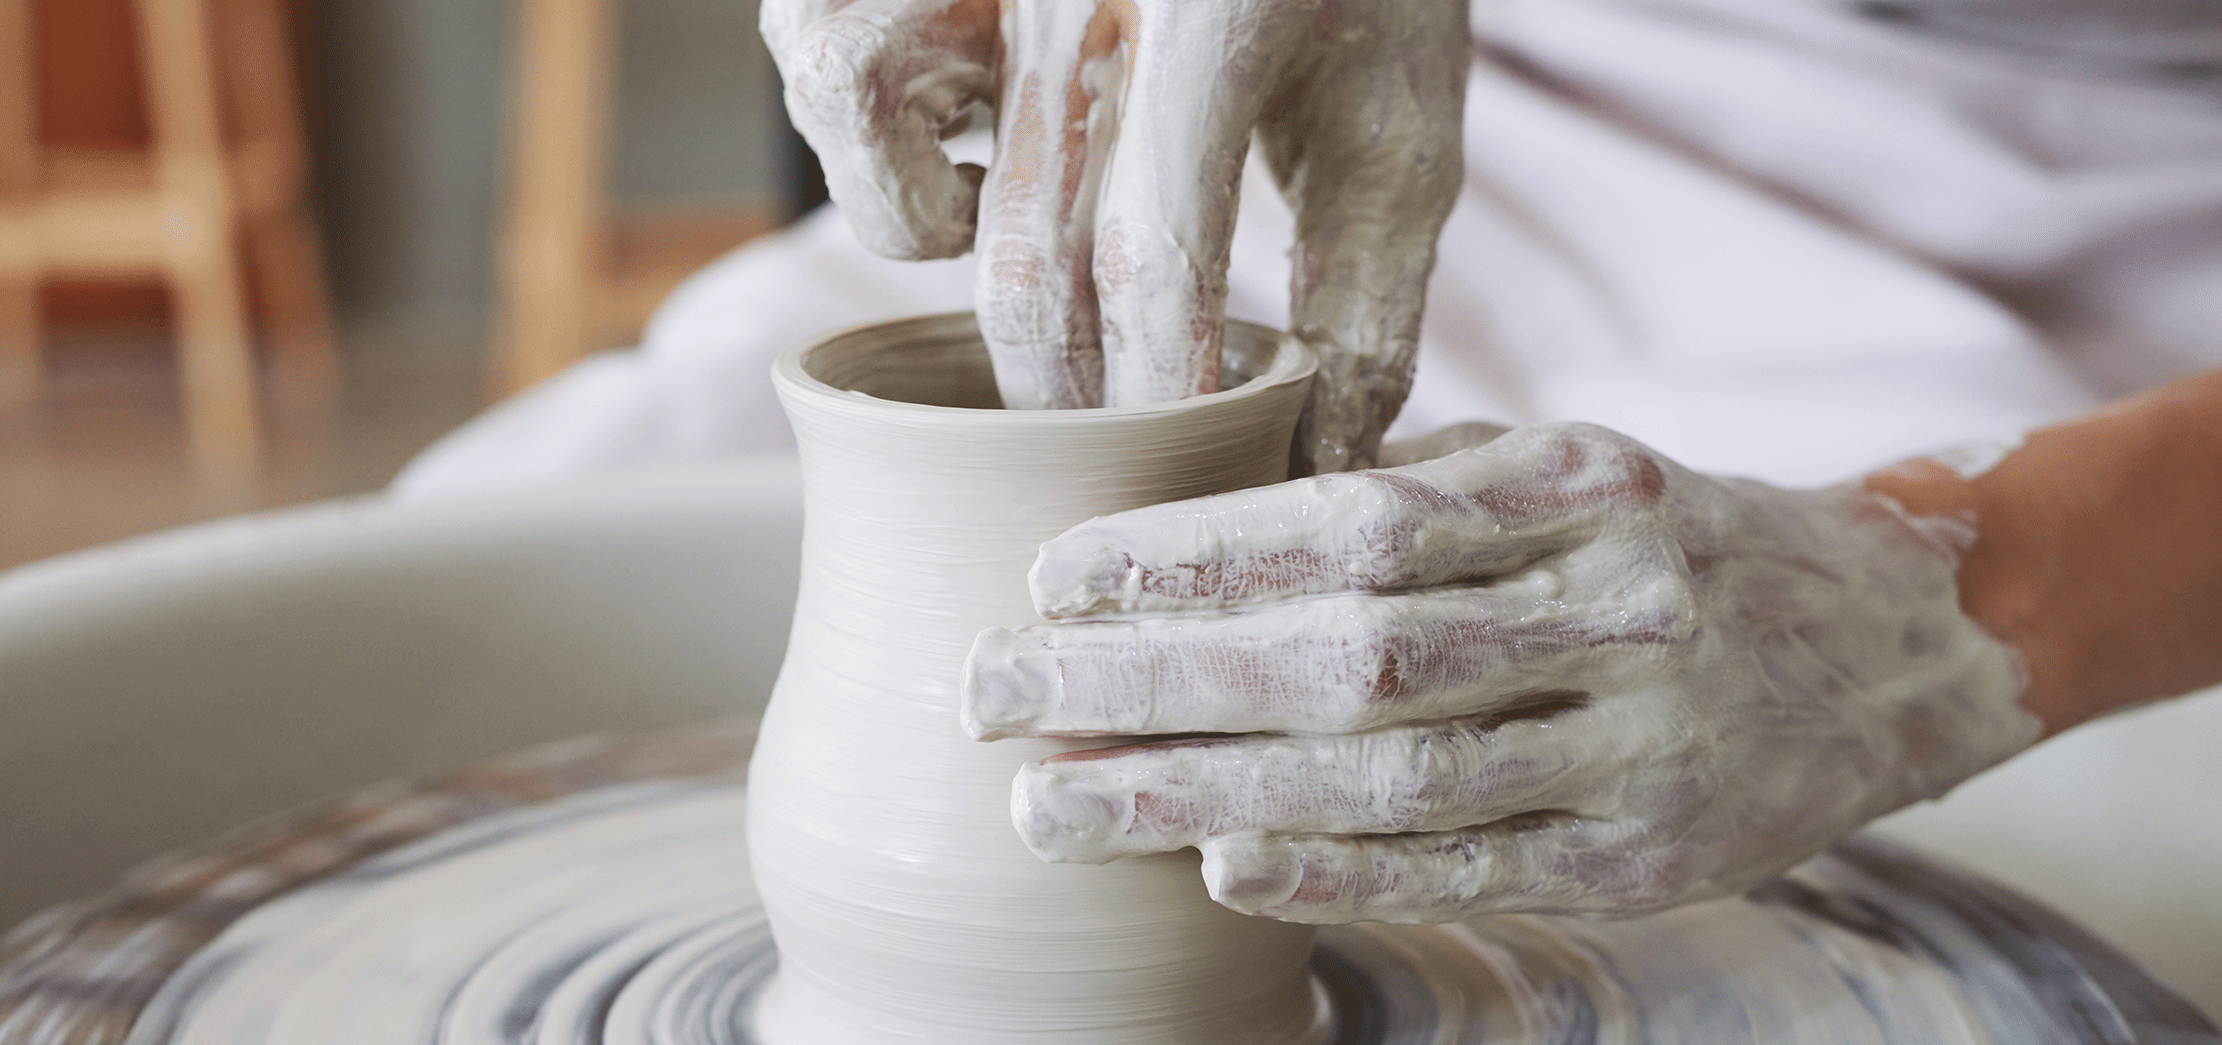 Ceramics: Definition, Properties, Types, and Applications